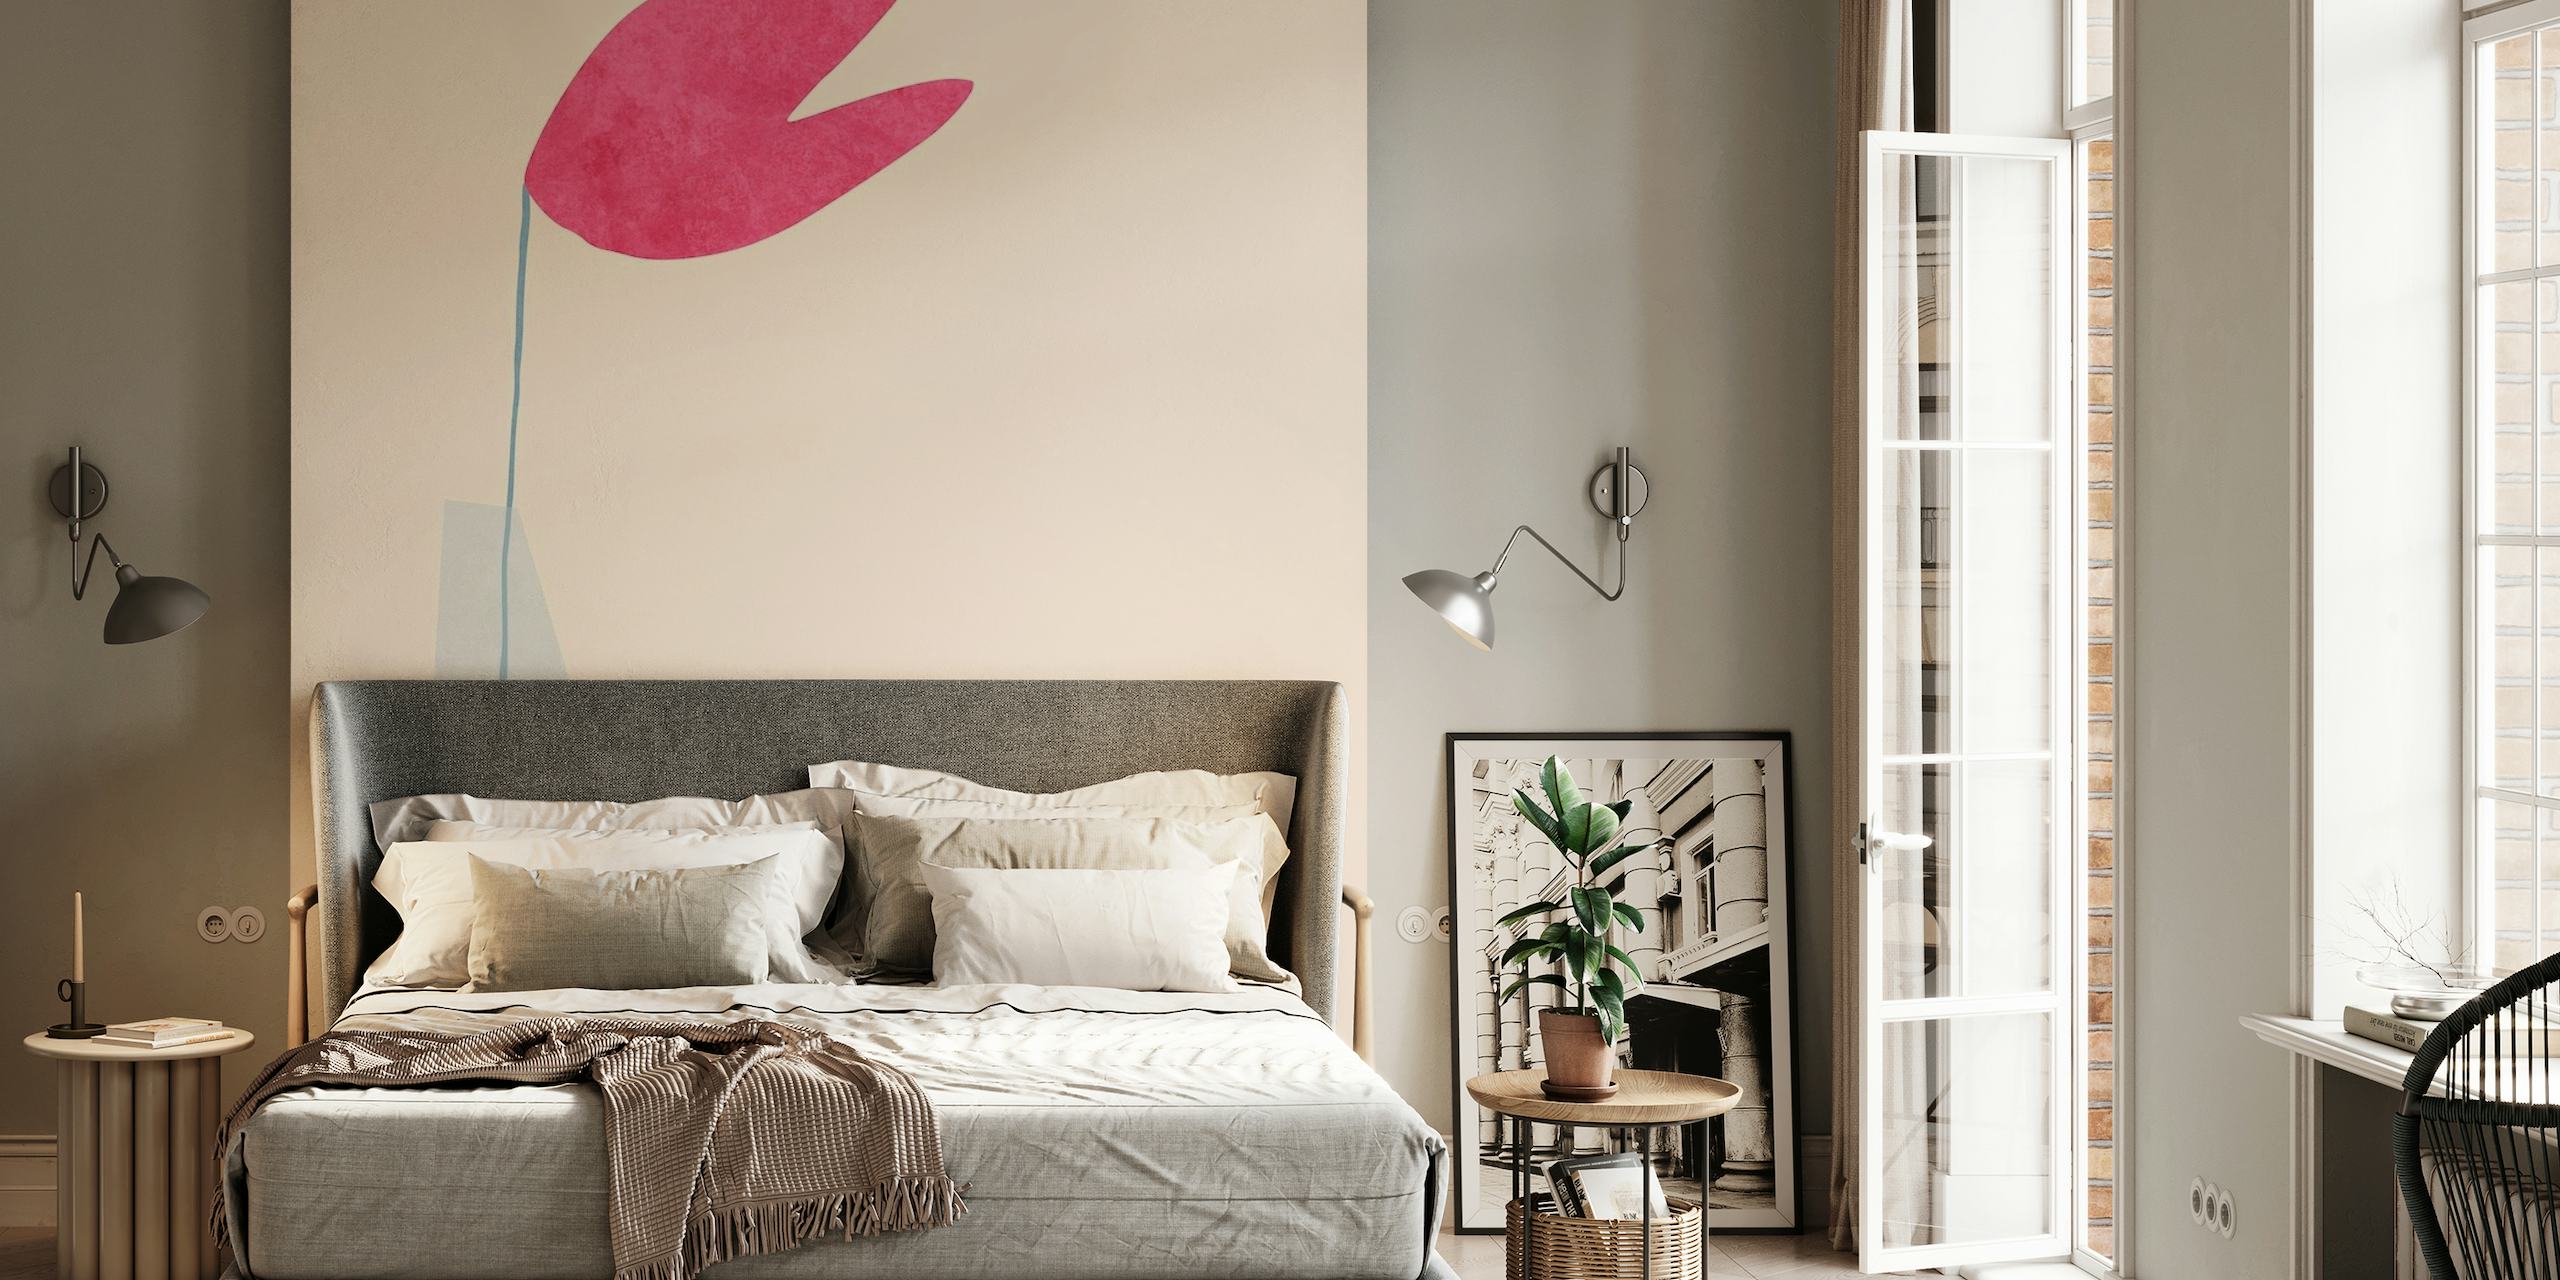 Abstract minimalist wall mural of a pink heart shape balanced on a slender form with a pastel backdrop